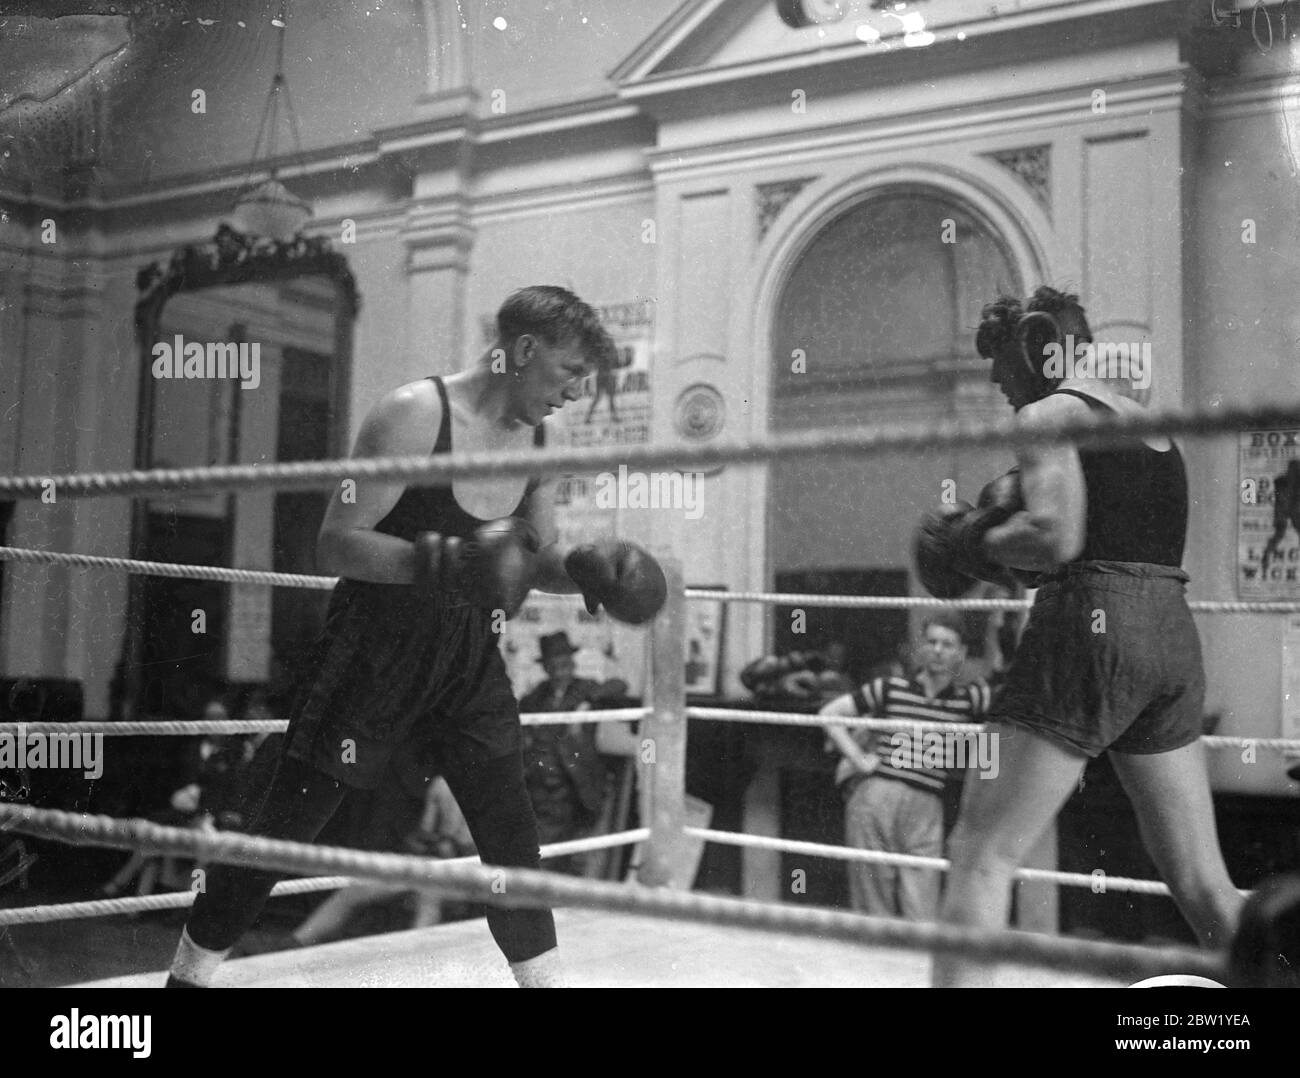 Tommy Farr trains for match with Walterl Neusel. Tommy Farr, the Welsh heavyweight, conqueror of Max Baer, is training at the Point House, Blackheath, London, for his fight with a Walter Neusel, the German boxer, at the Haringay Arena, London, on 15 June. Photo shows, Tommy Farr (left) in a training bout with a sparring partner at his Blackheath gymnasium. 9 June 1937 Stock Photo